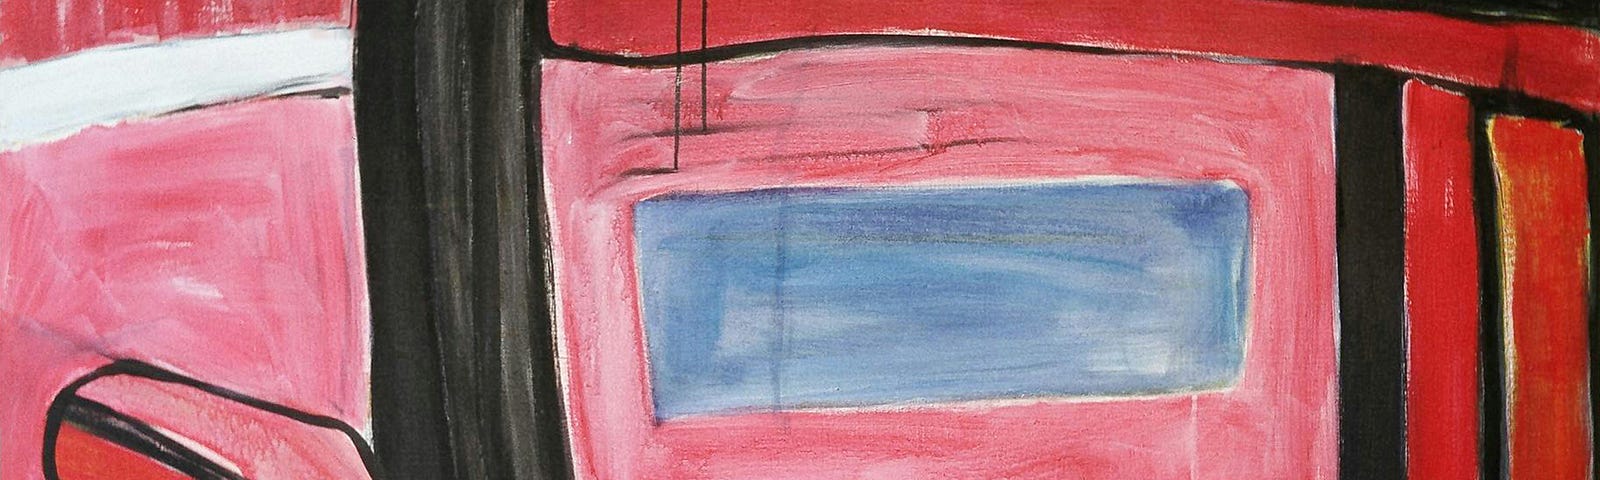 an abstract painting of reds, pinks, some black and blue. Resembling walls, a window and perhaps a boat.